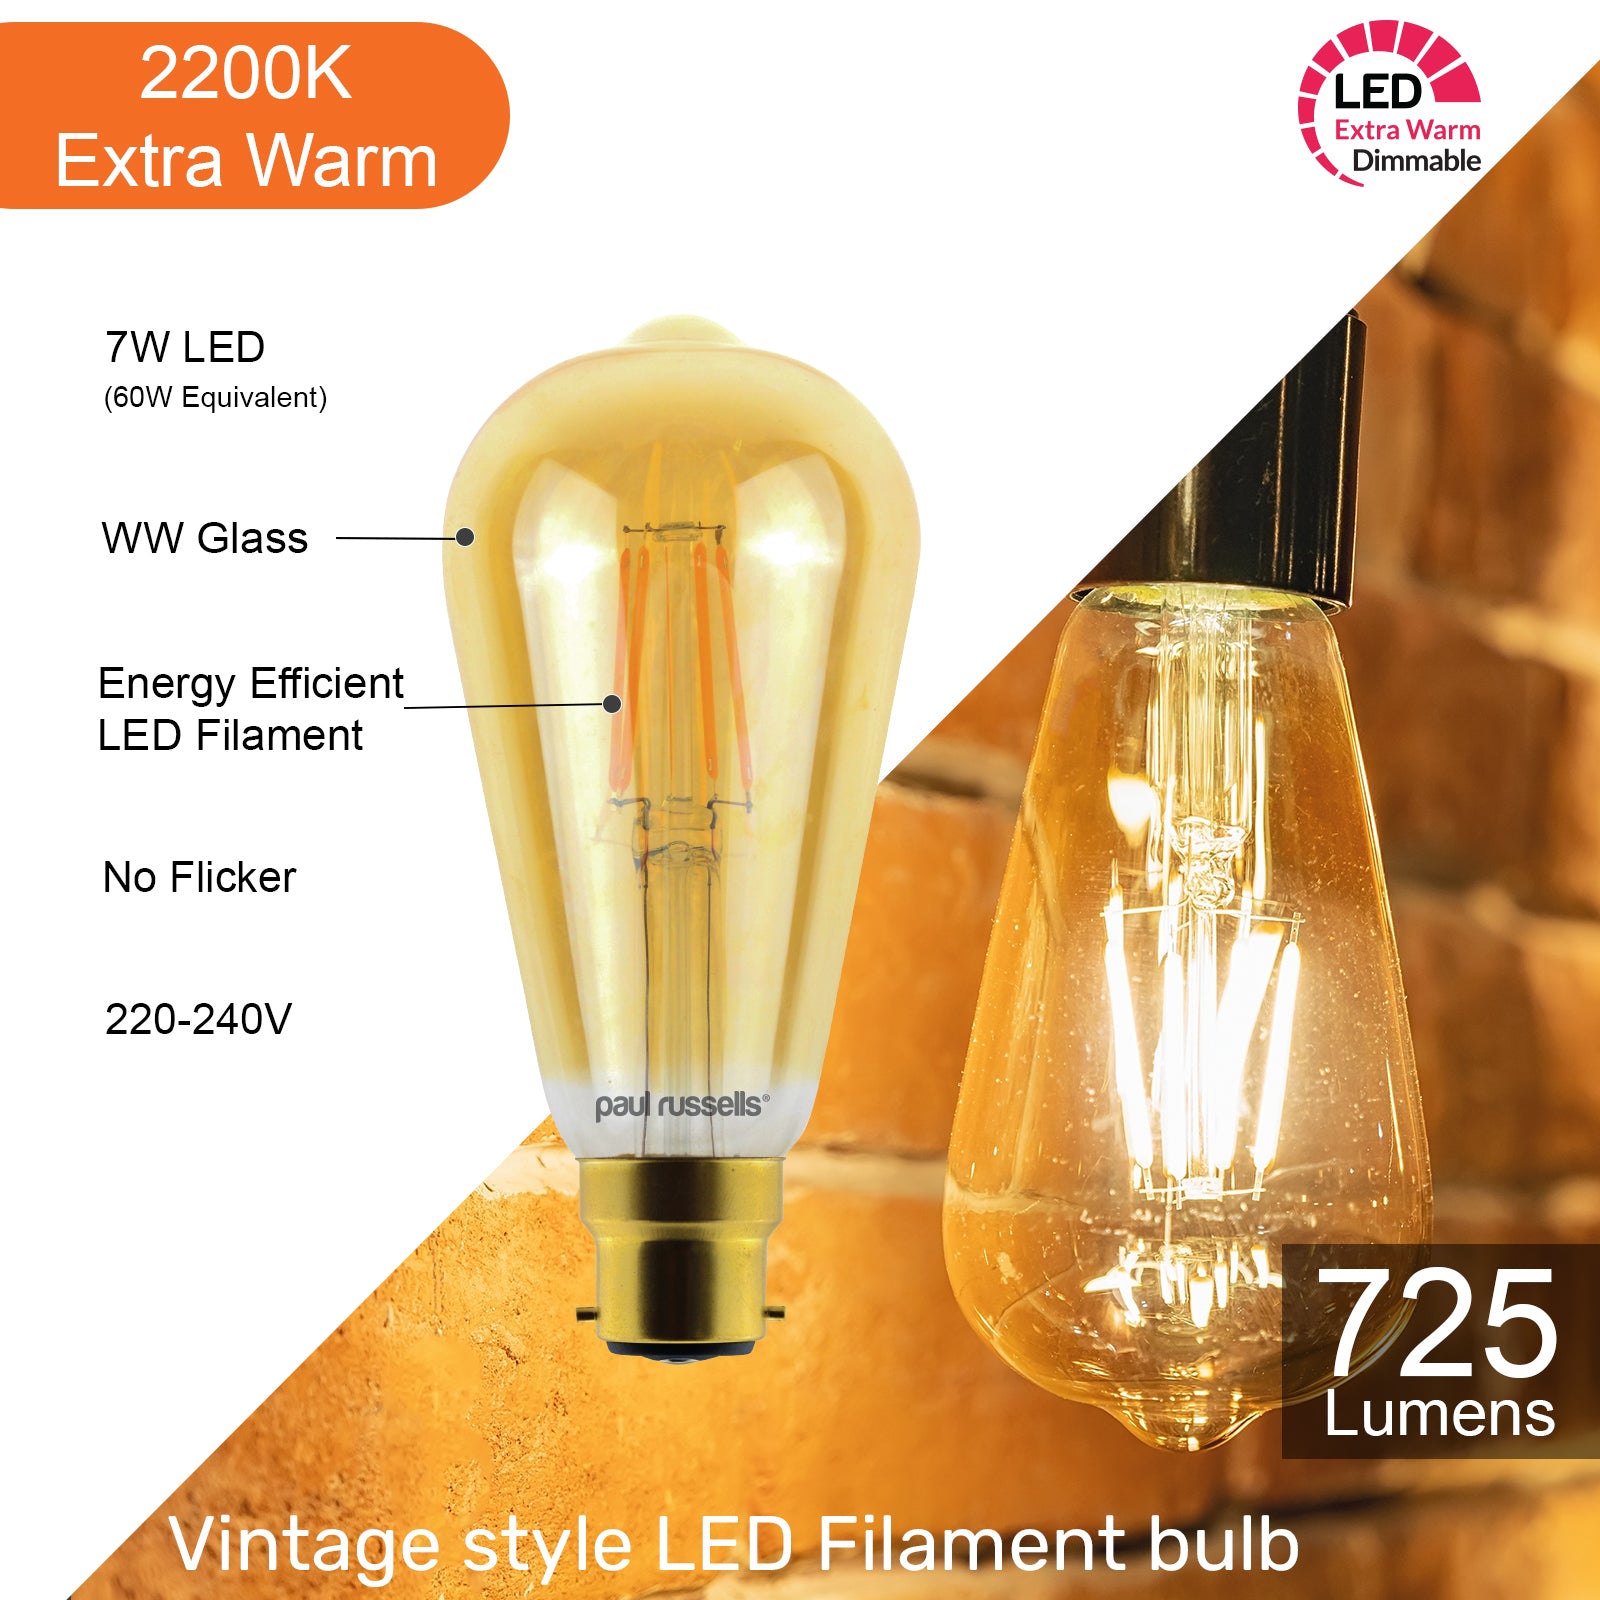 LED Dimmable Filament ST64 7W (60w), BC/B22, 725 Lumens, Extra Warm White(2200K), 240V